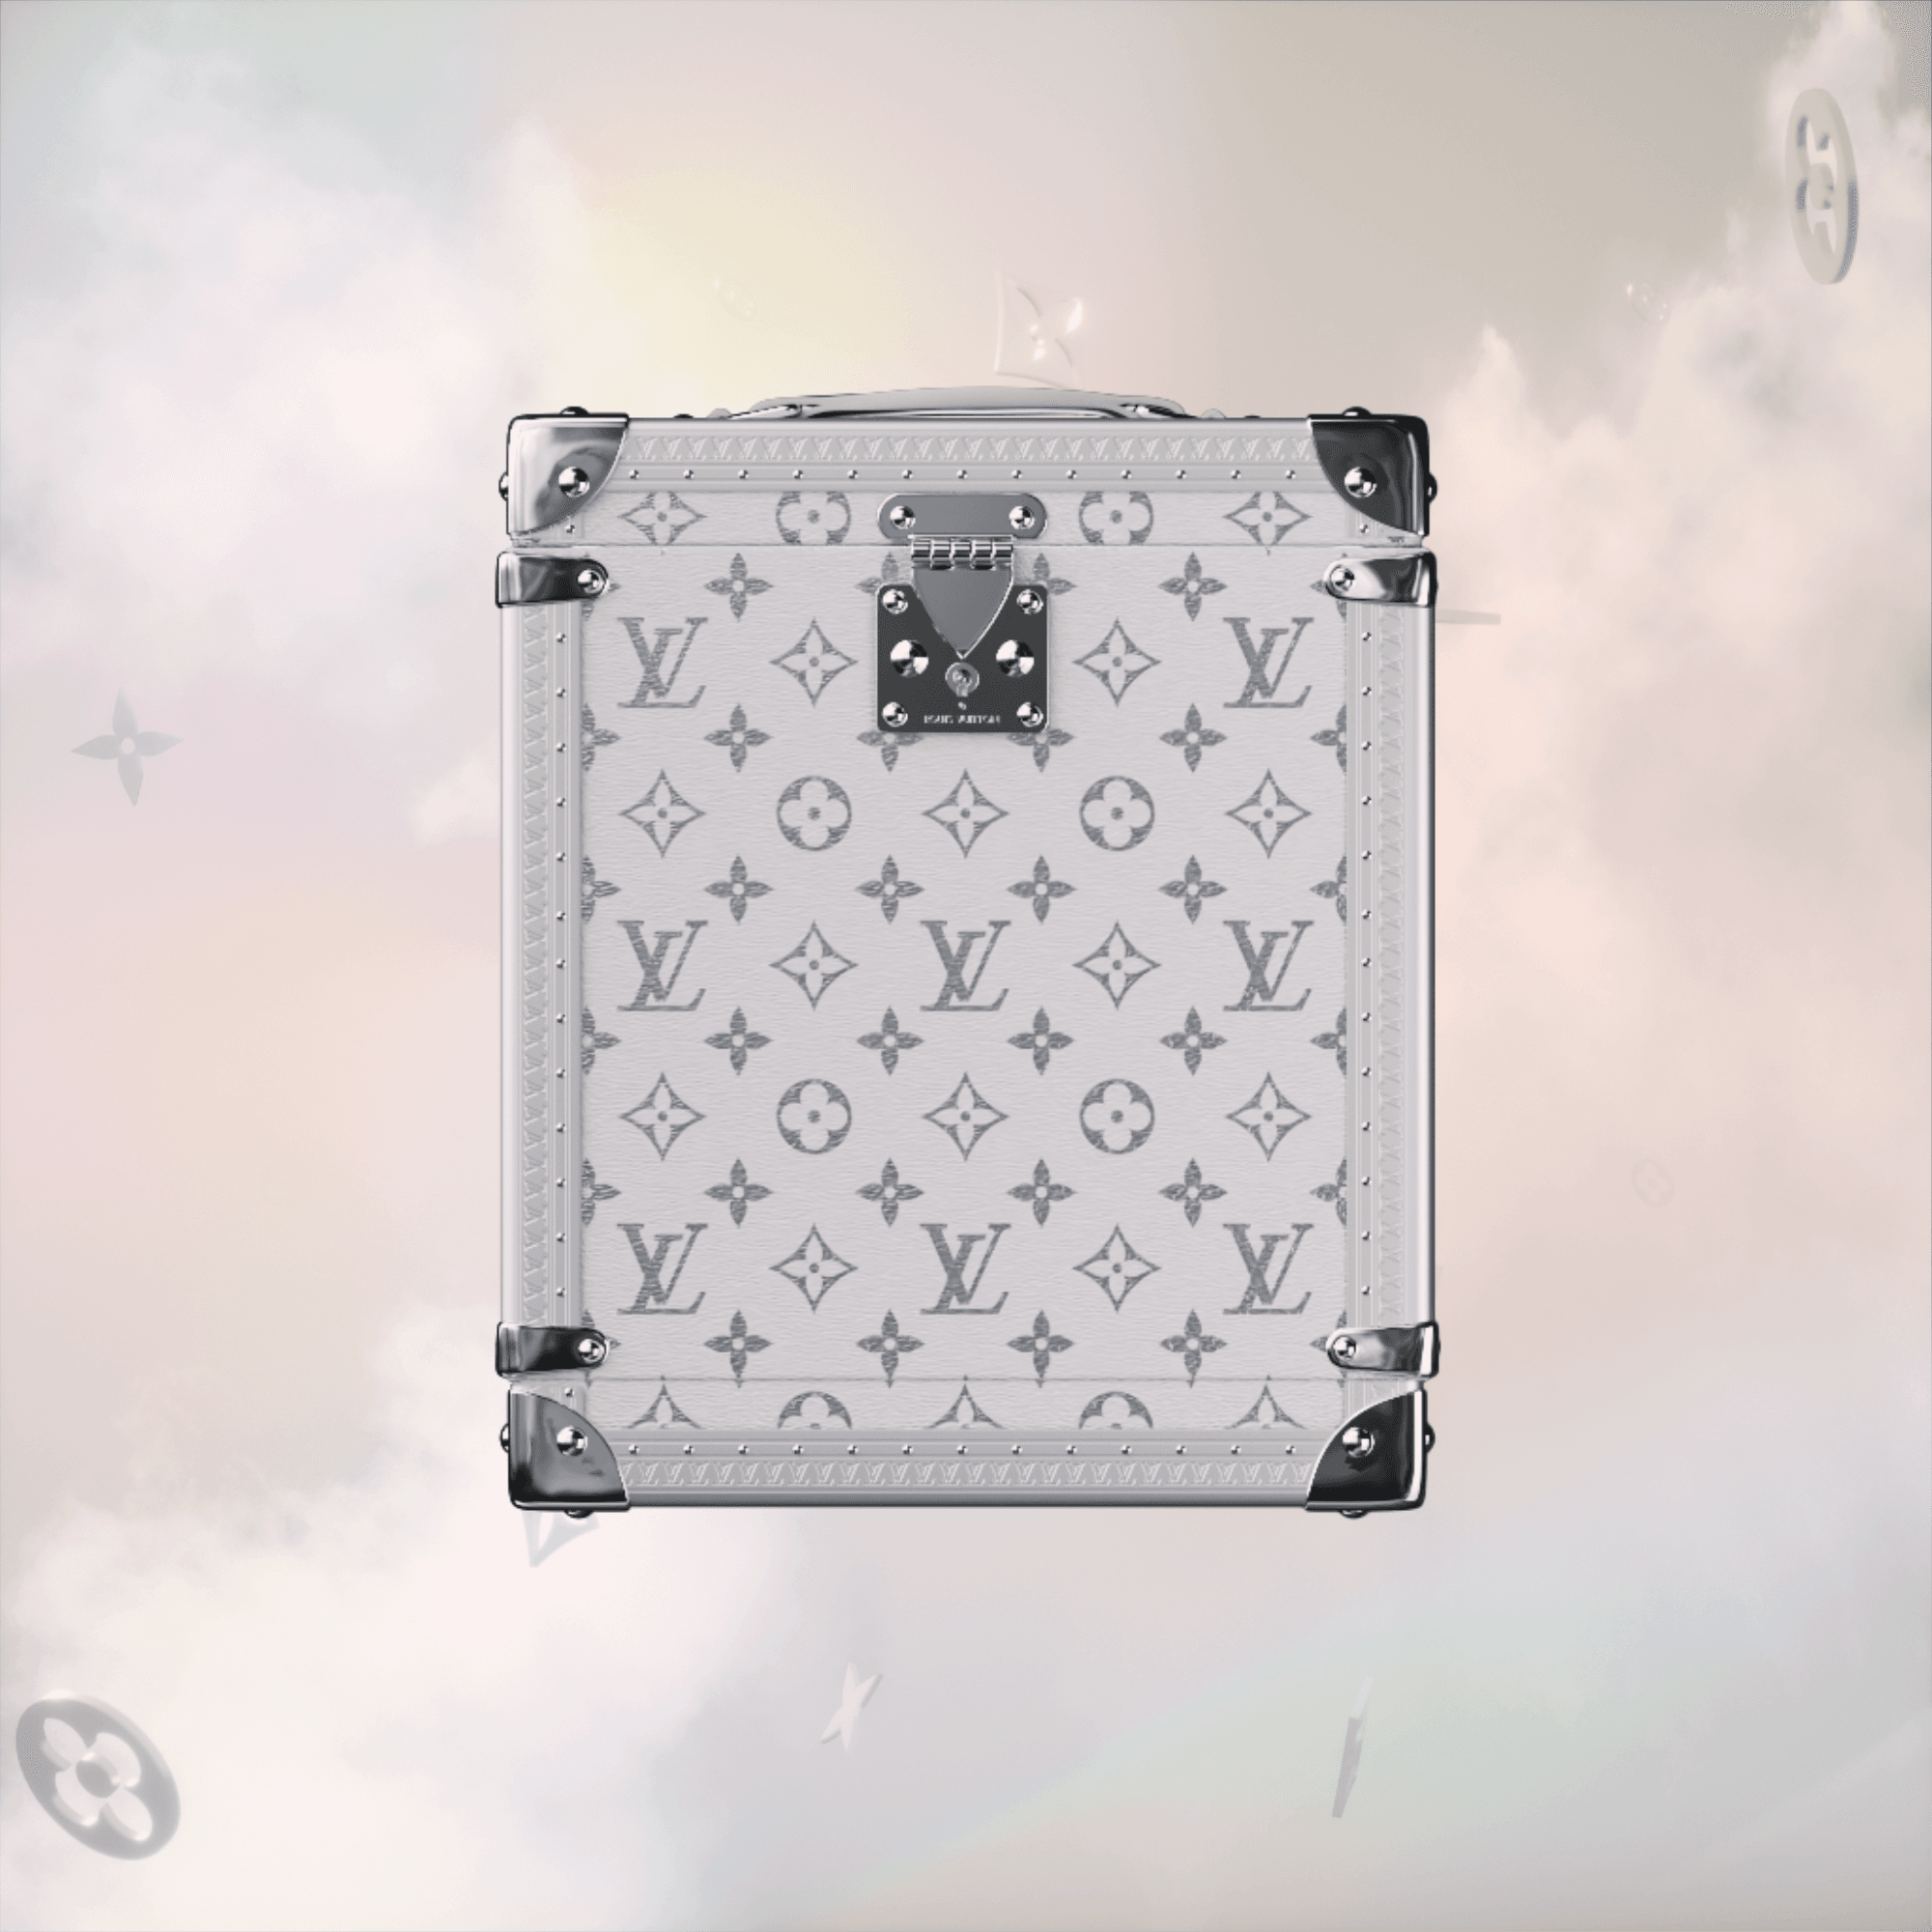 First Exclusive Item Available for Louis Vuitton VIA Trunk Holders